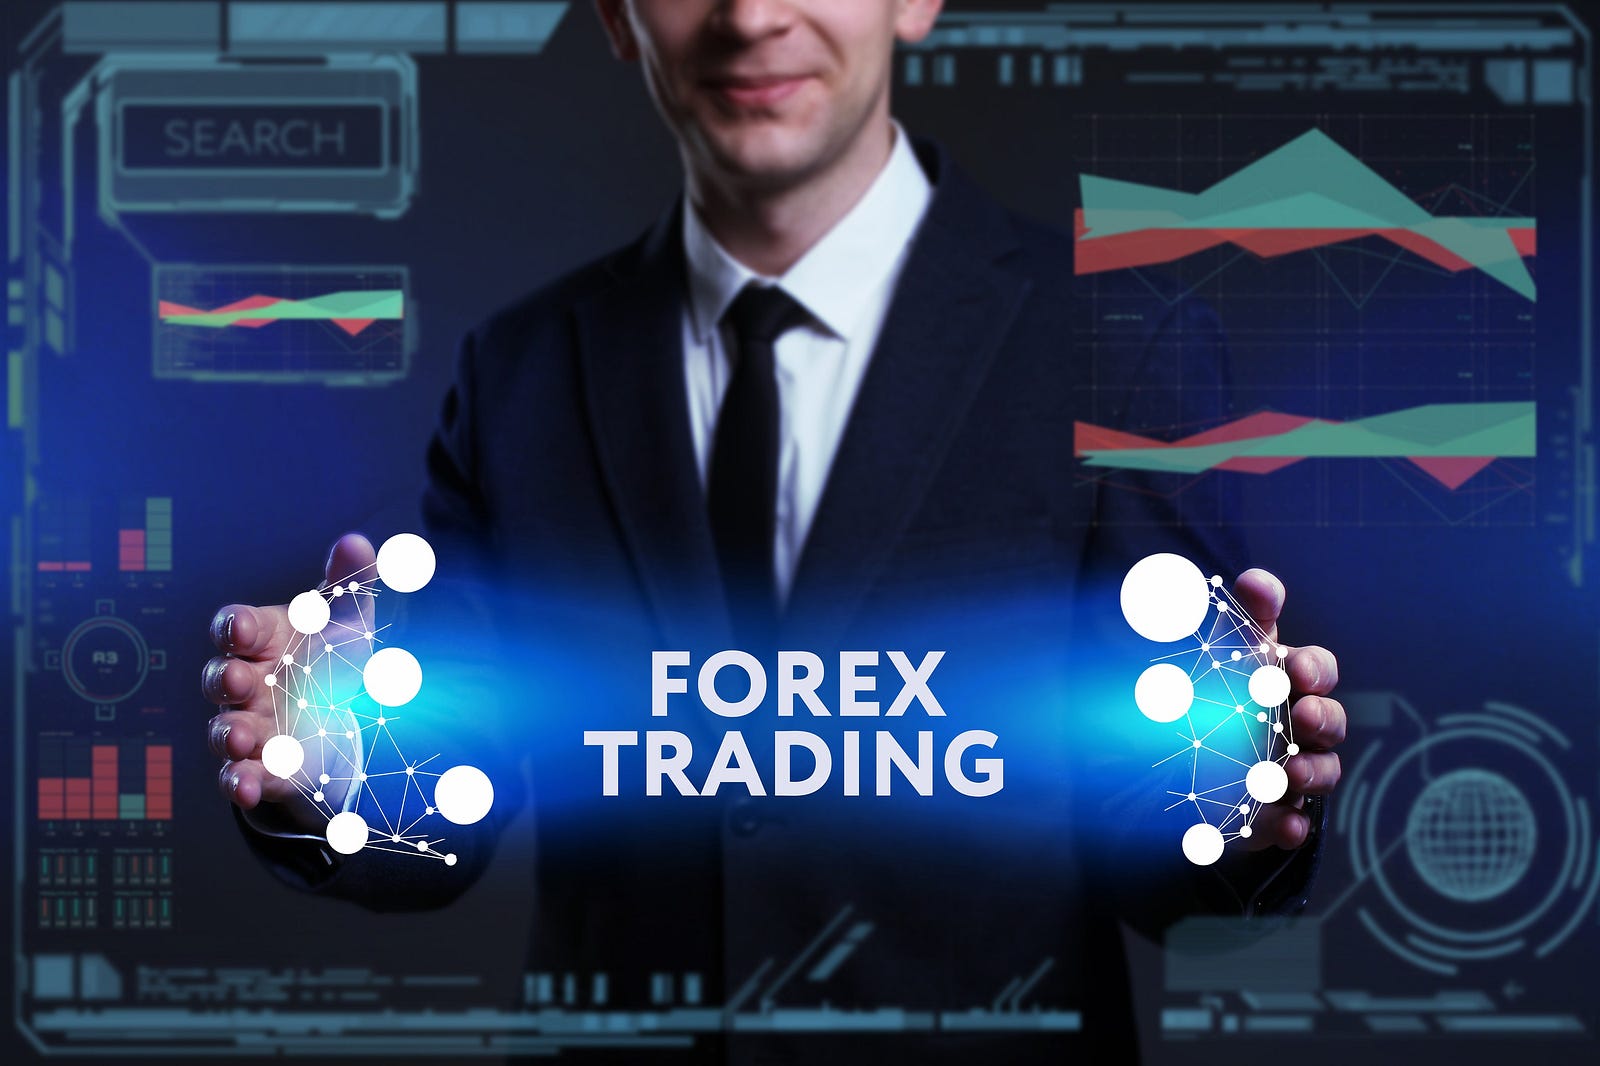 Forex Trading Demo Account India - All About Forex